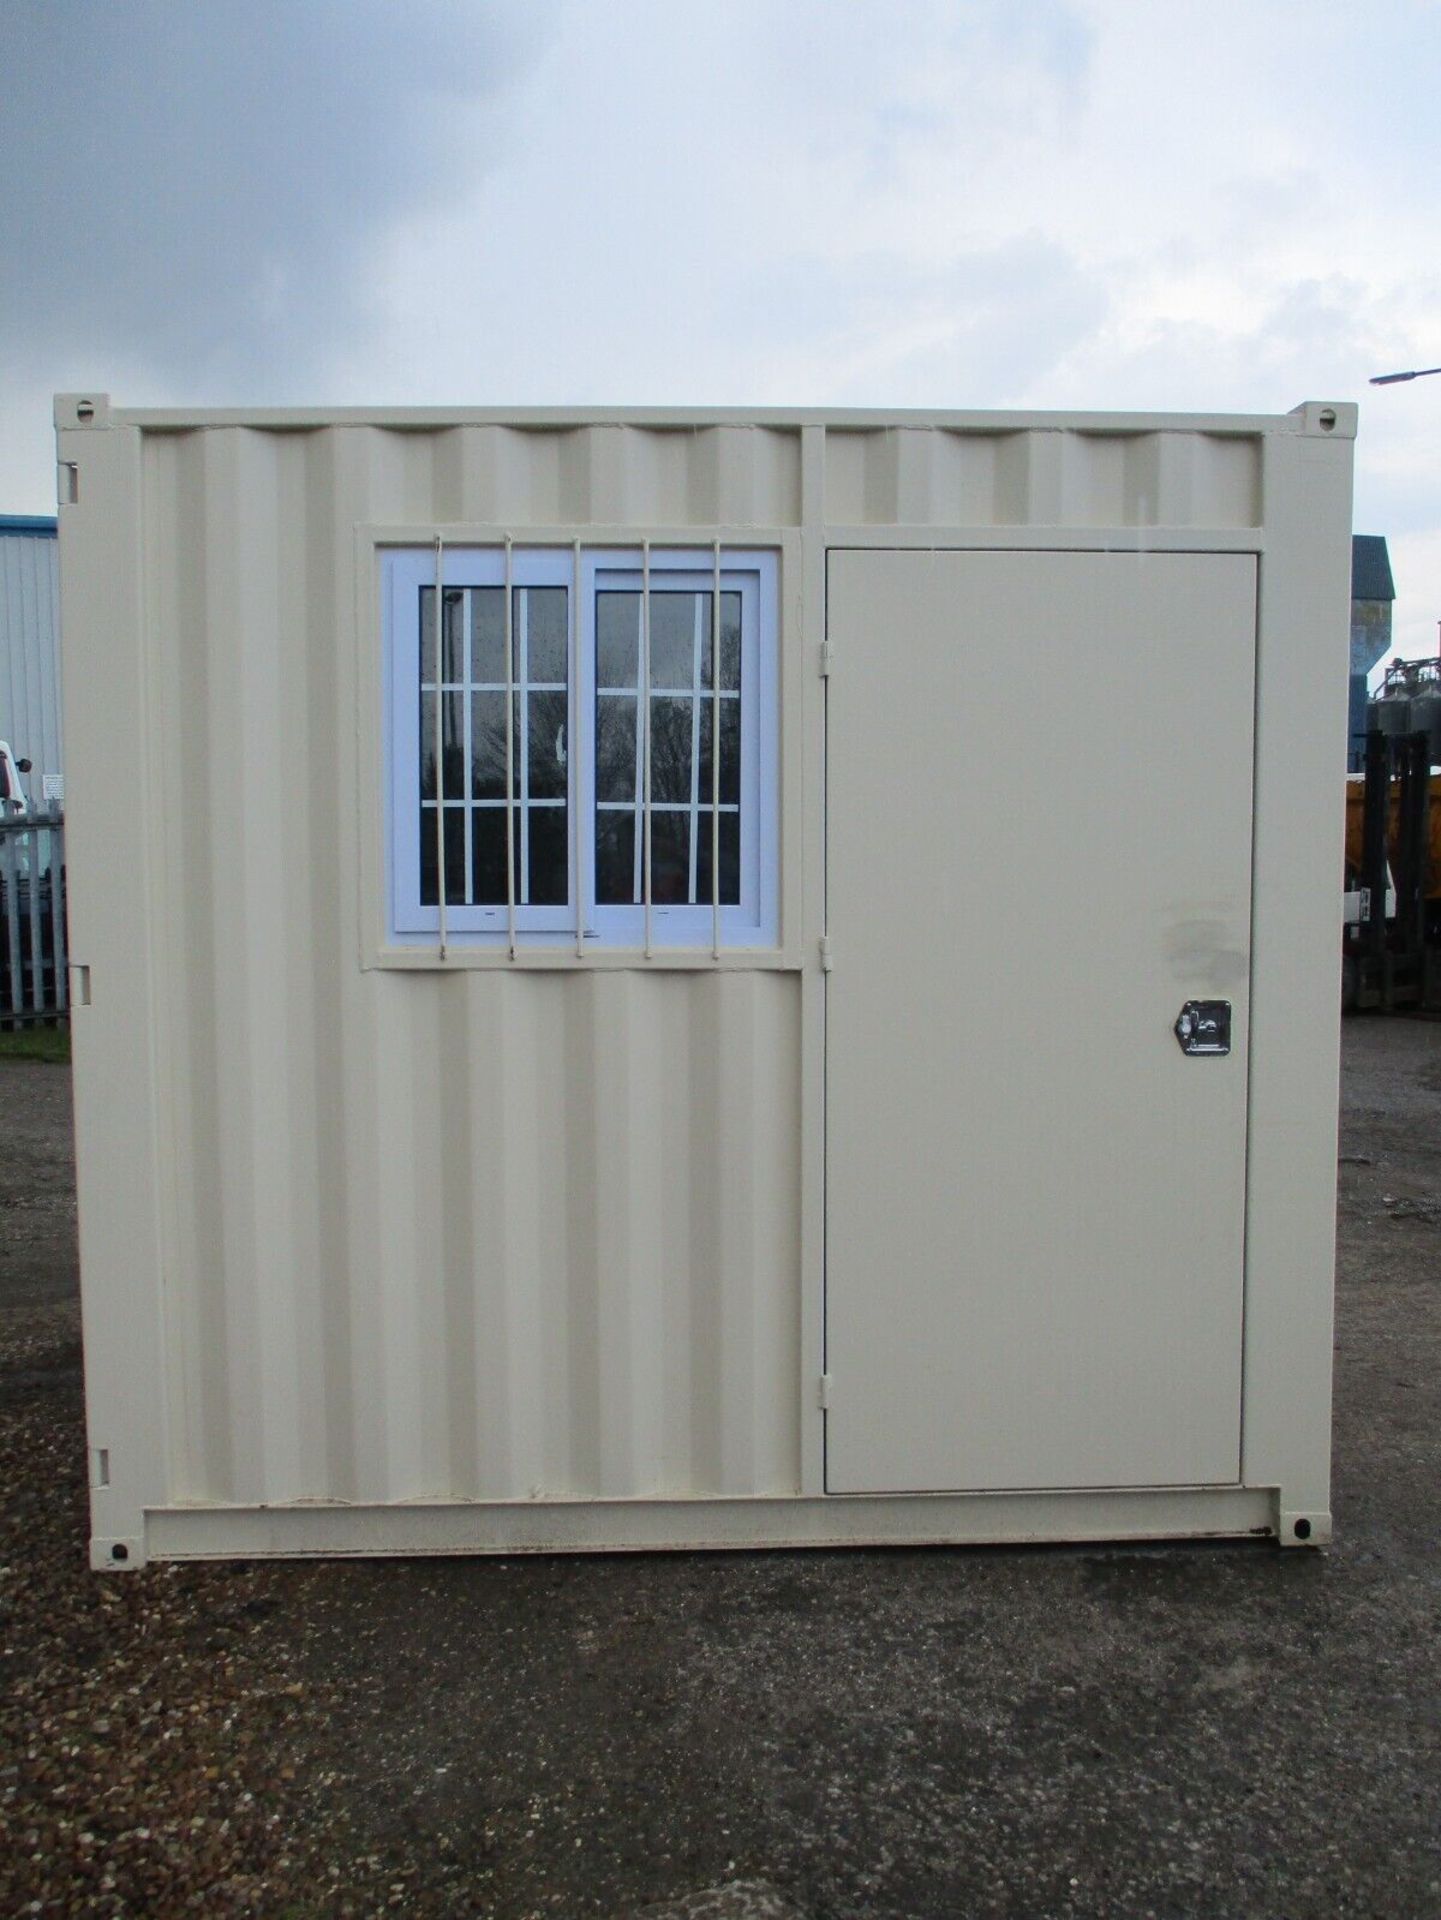 YOUR HOME OFFICE AWAITS: 9-FOOT CONTAINER WITH WINDOW